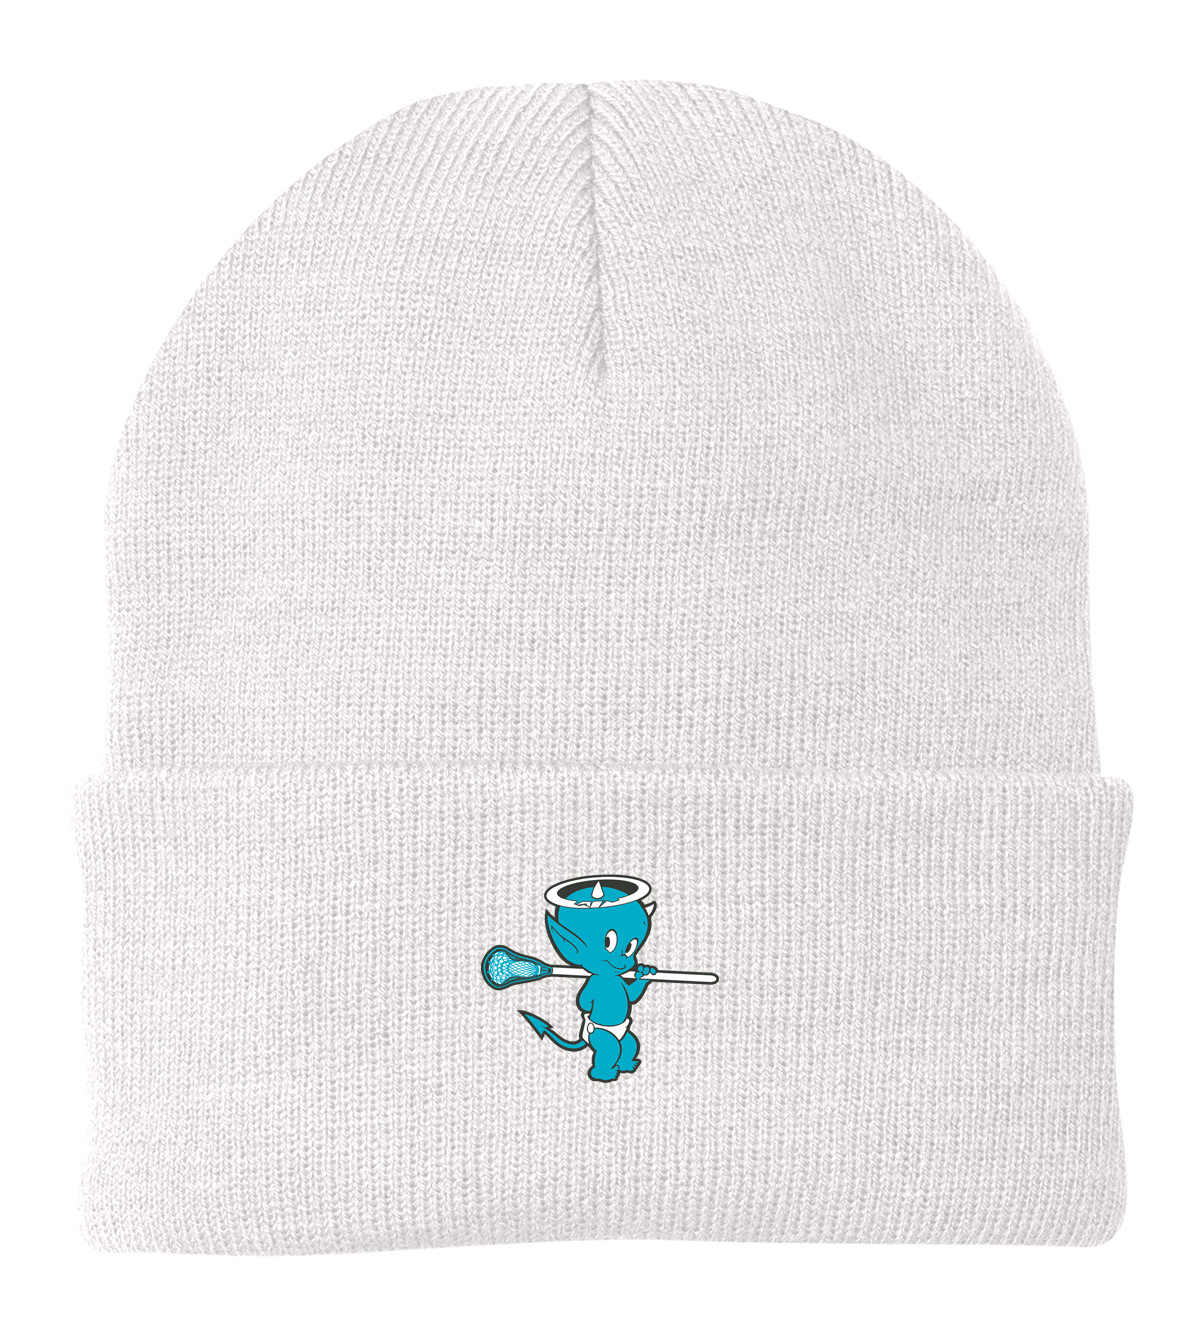 Angels With Attitude  Knit Beanie